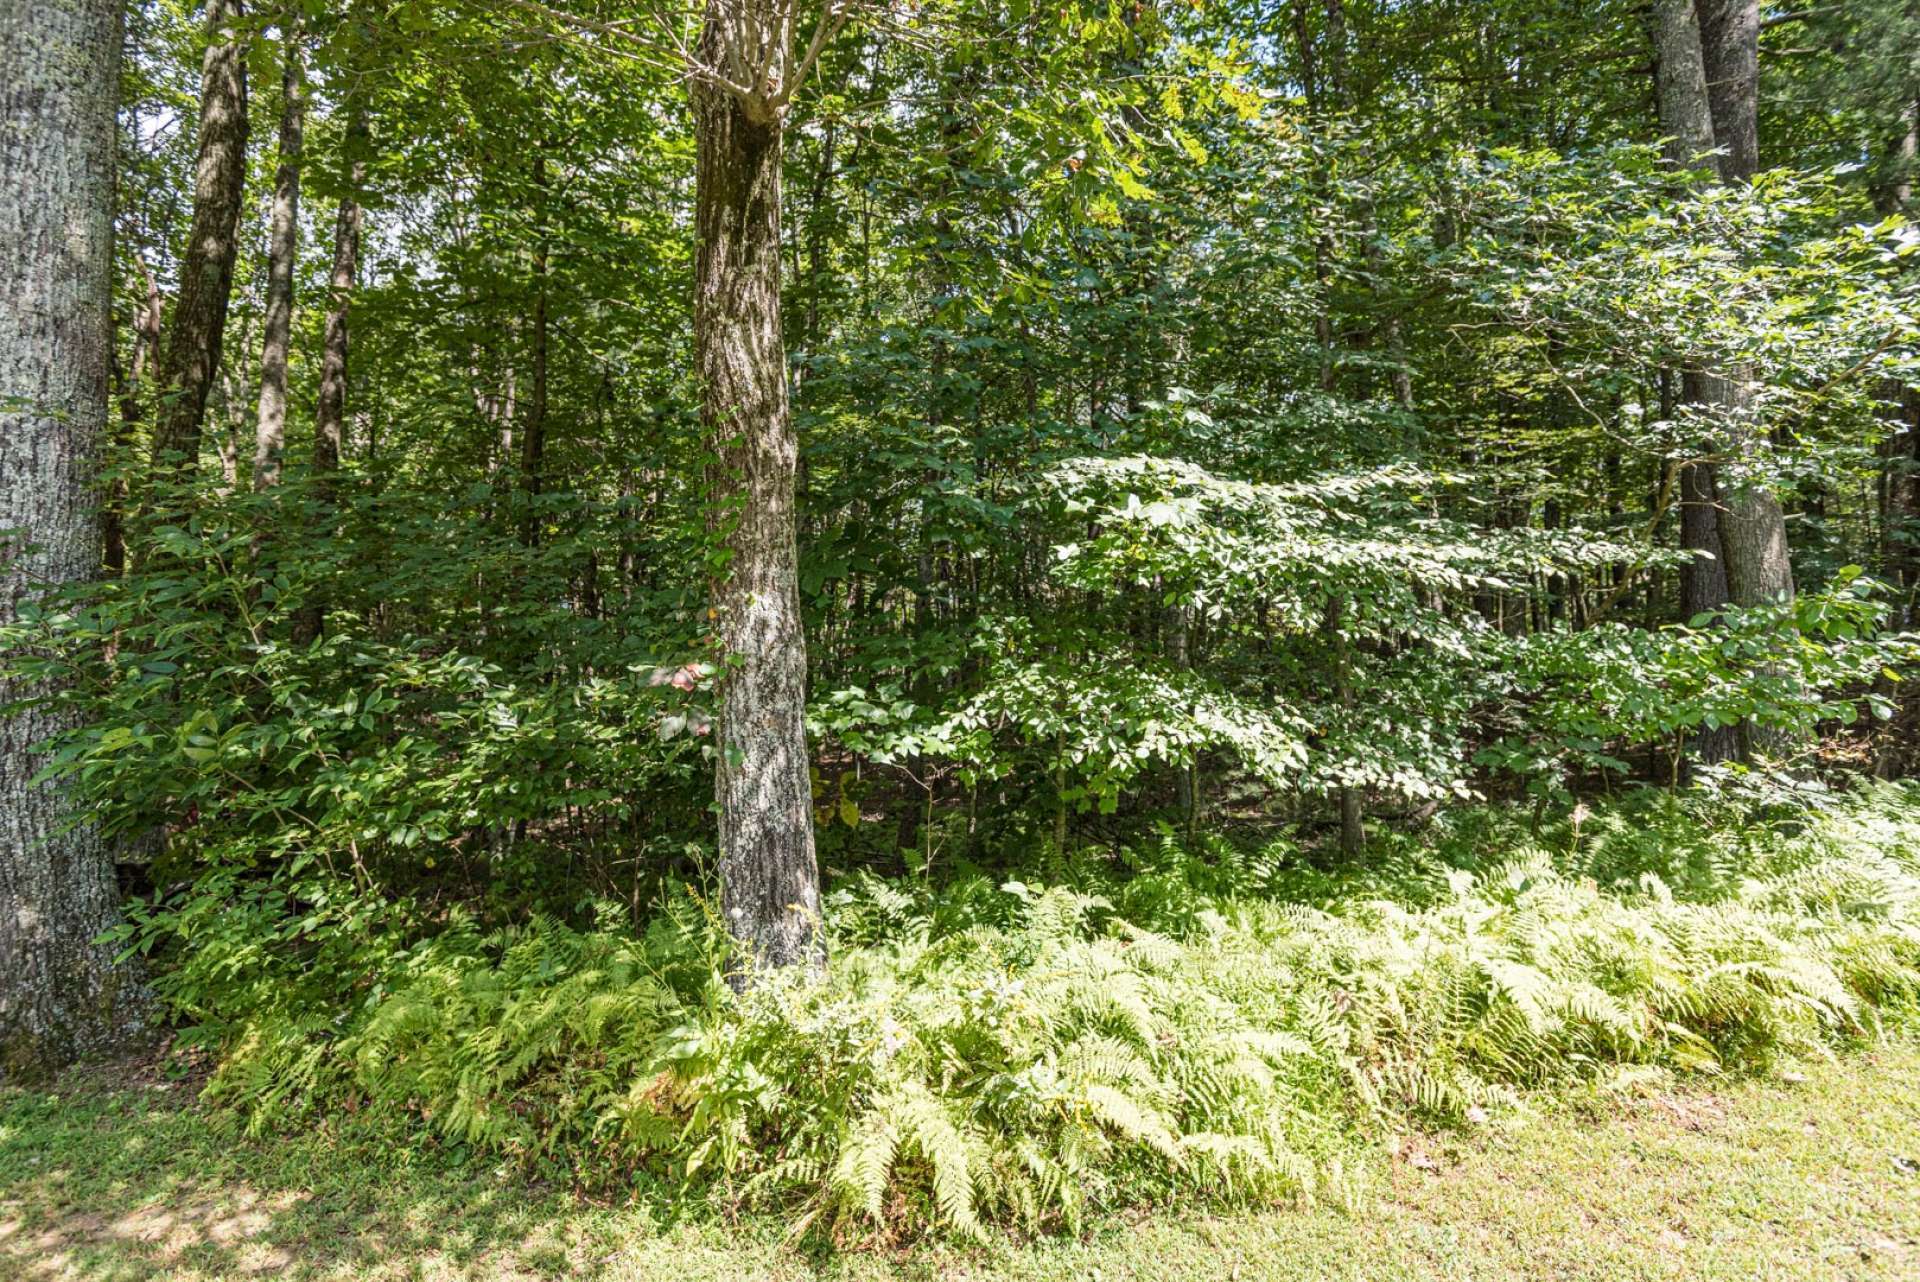 This 1.03 acre lot would be great for your mountain cabin, tiny home, park model or camper!  This lot is wooded and lays well, you can walk through the lot easily.